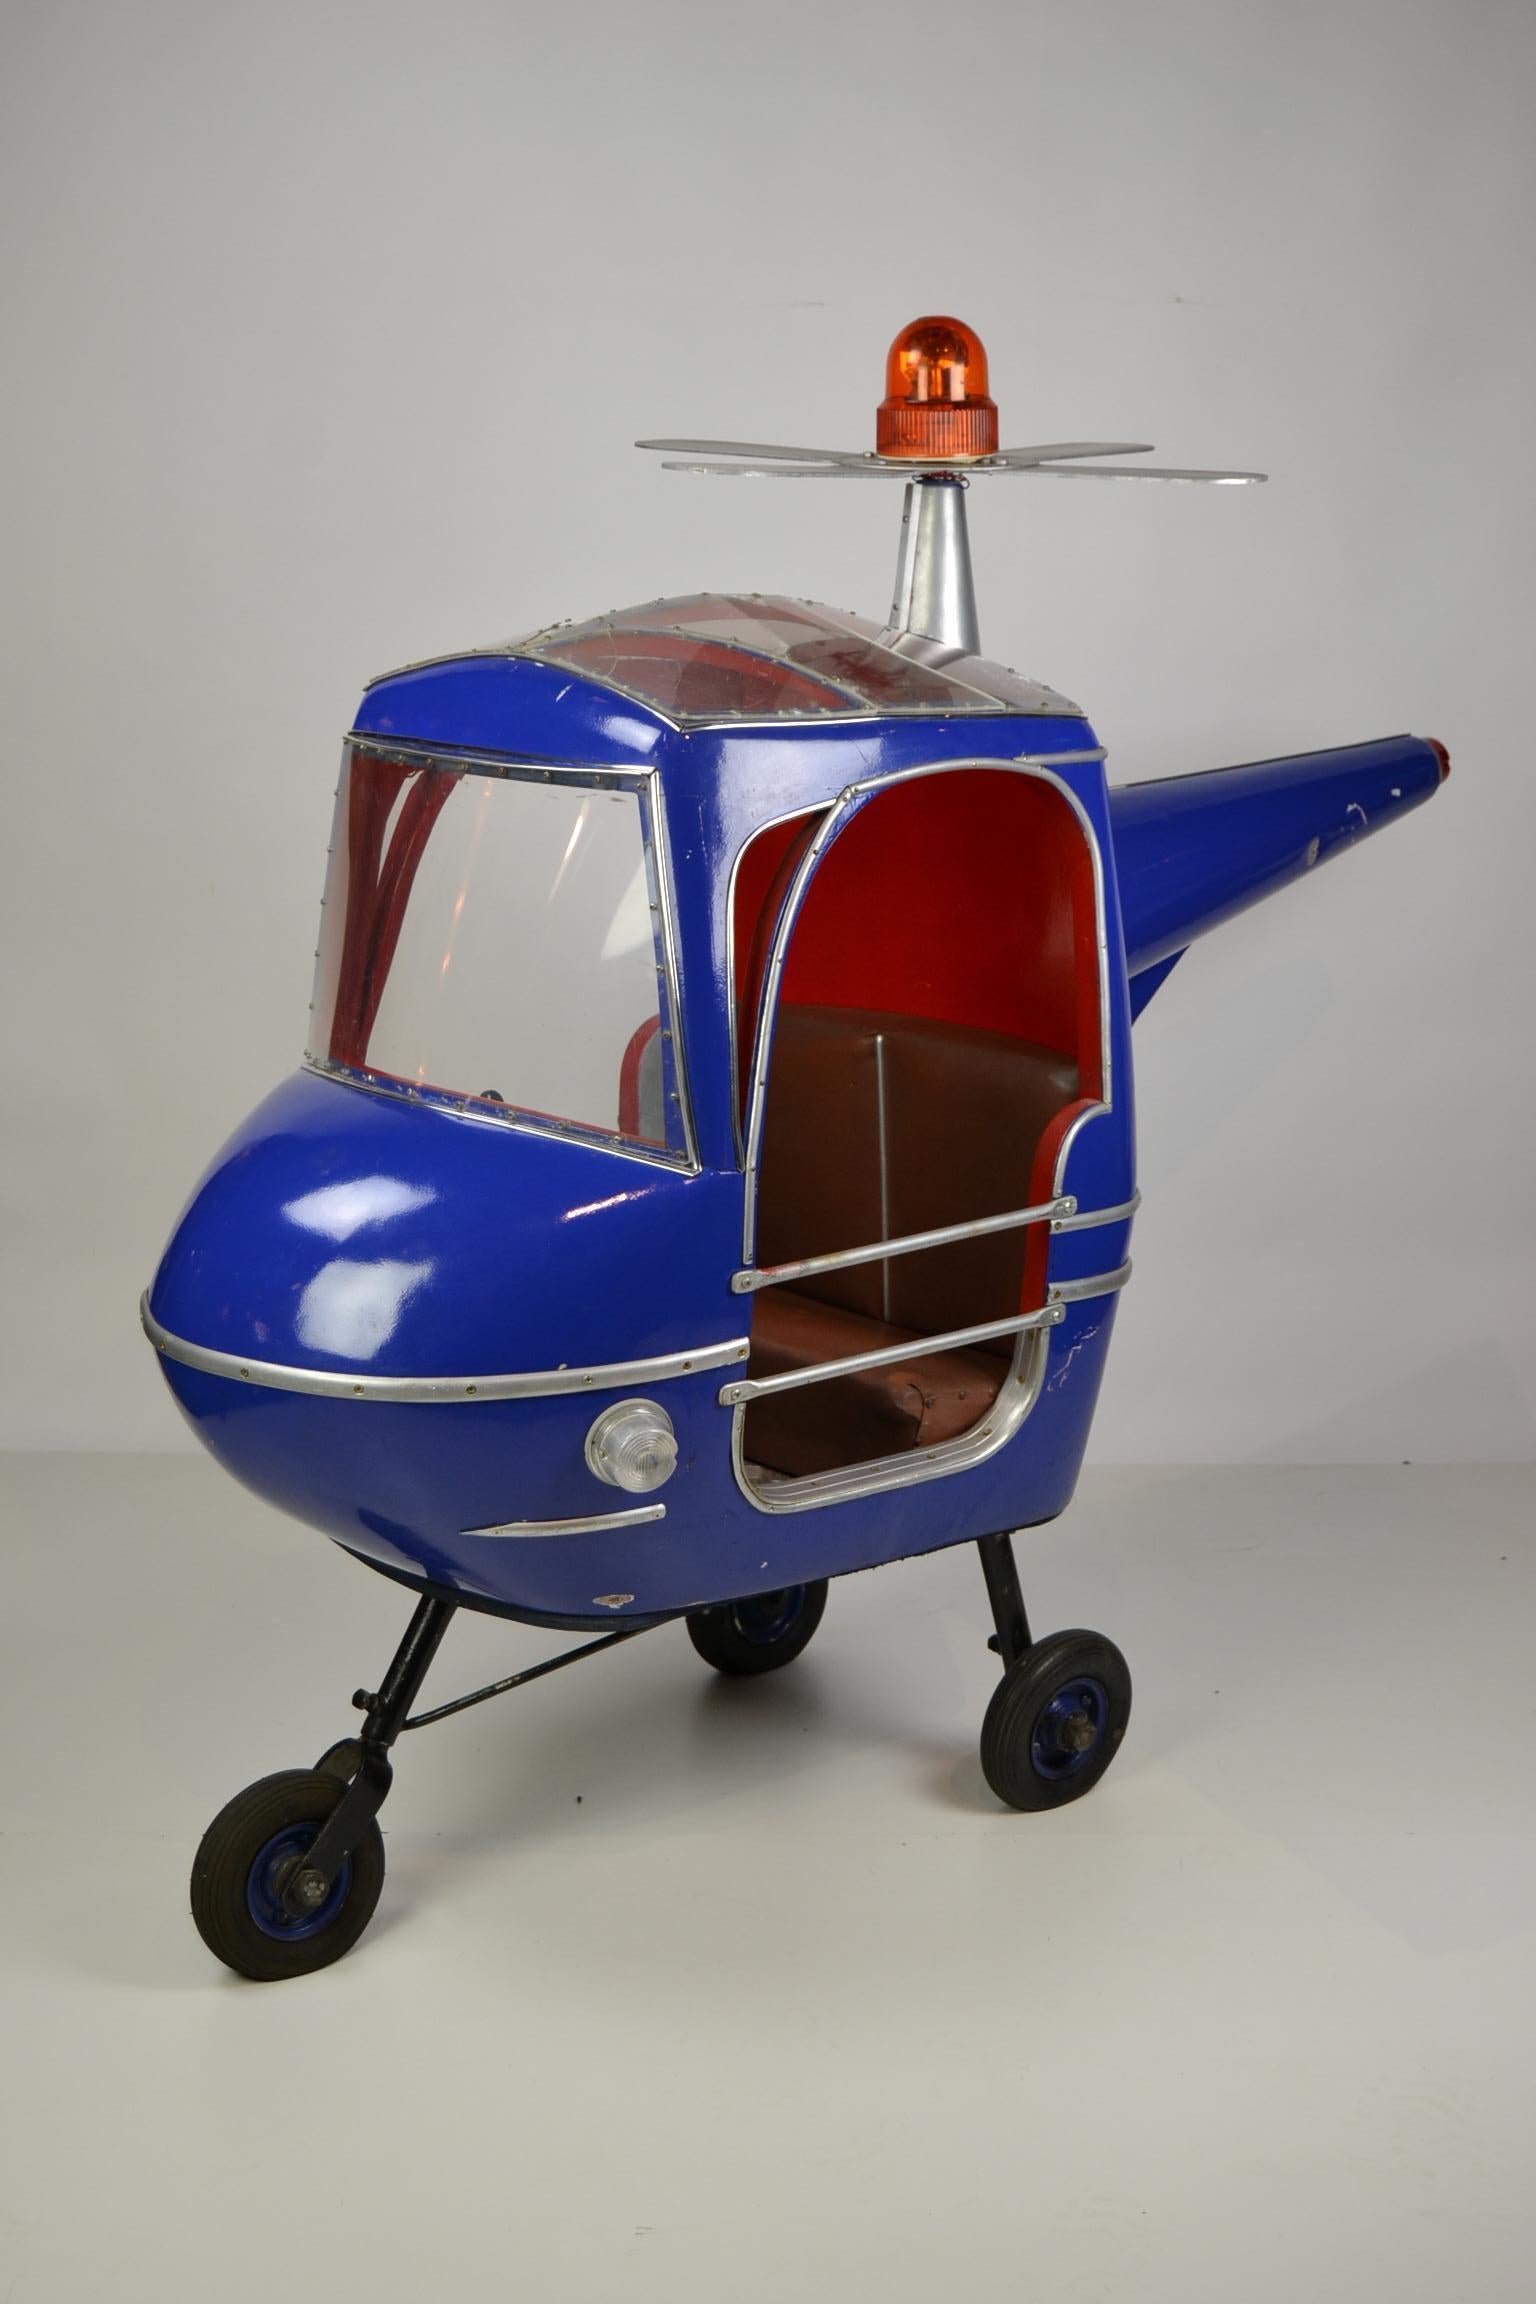 Eye-catching Blue carousel ride chopper.
This Carnival Art Helicopter was made by the German Company Hennecke during the 1950s.
Its a carnival ride for 2 kids with 2 steering wheels inside.
This whirlybird has the color bright blue - cobalt